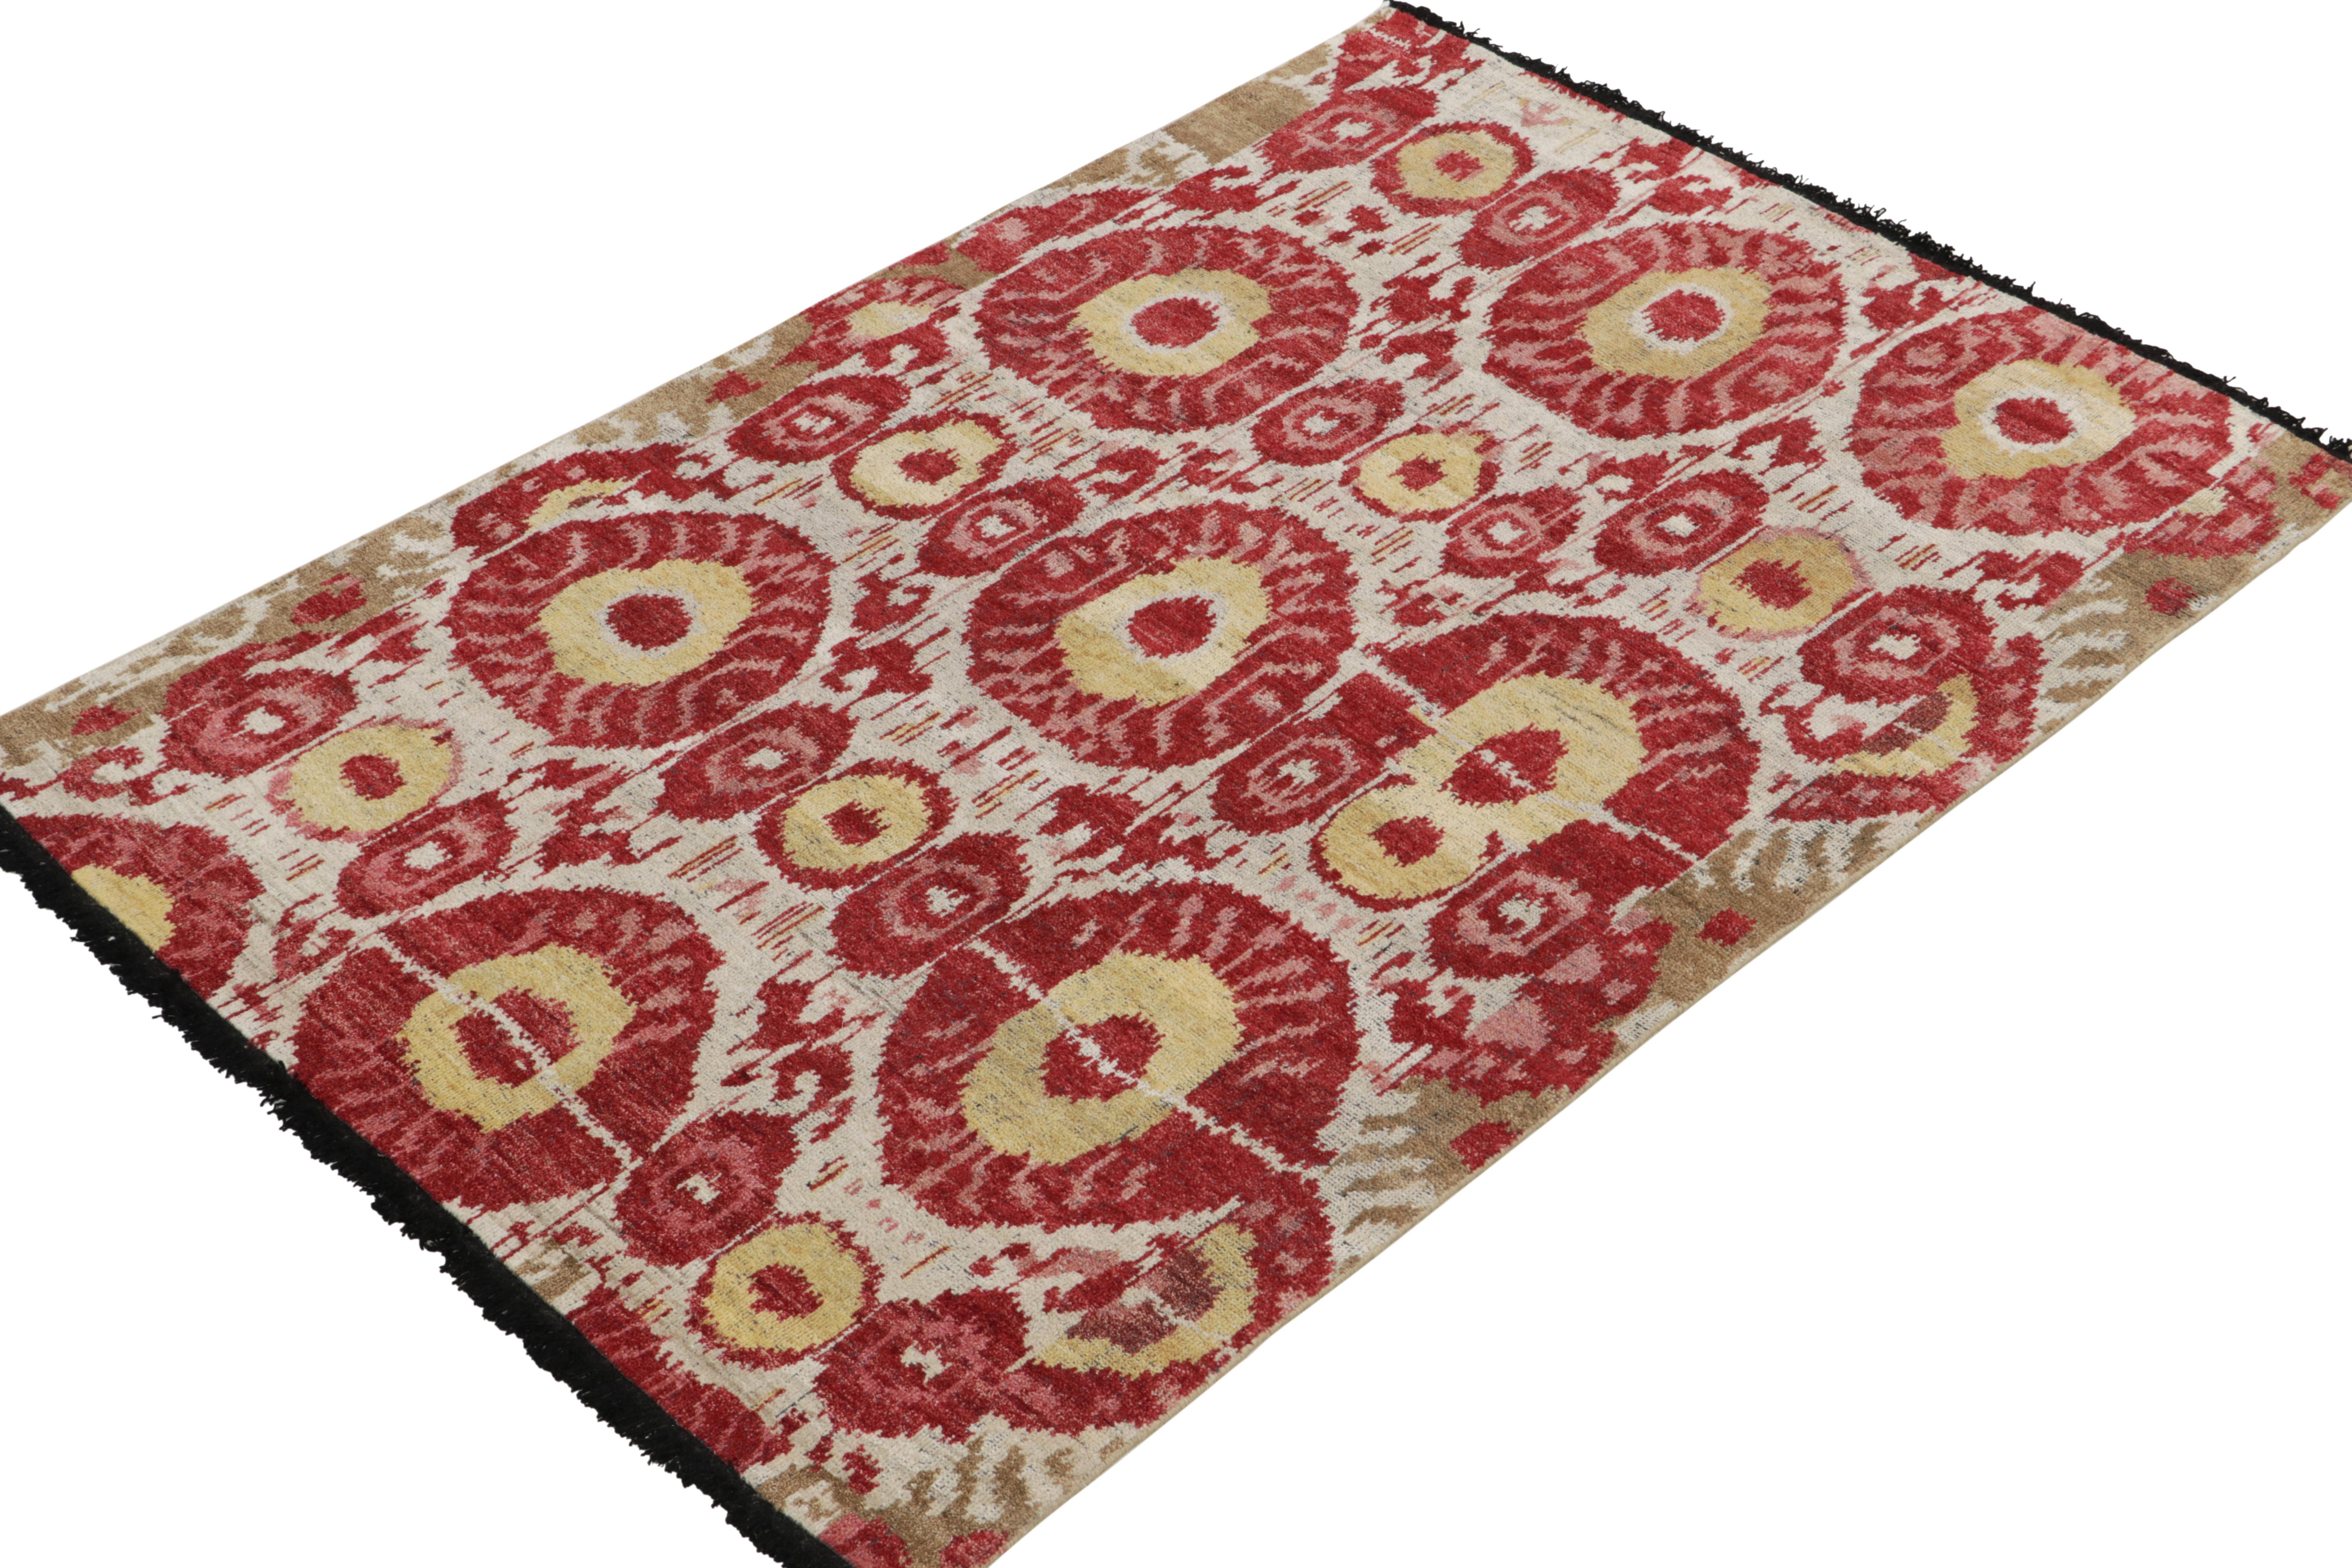 Indian Rug & Kilim's Tribal Style rug in Red, Yellow, Green, White Ikats Pattern For Sale